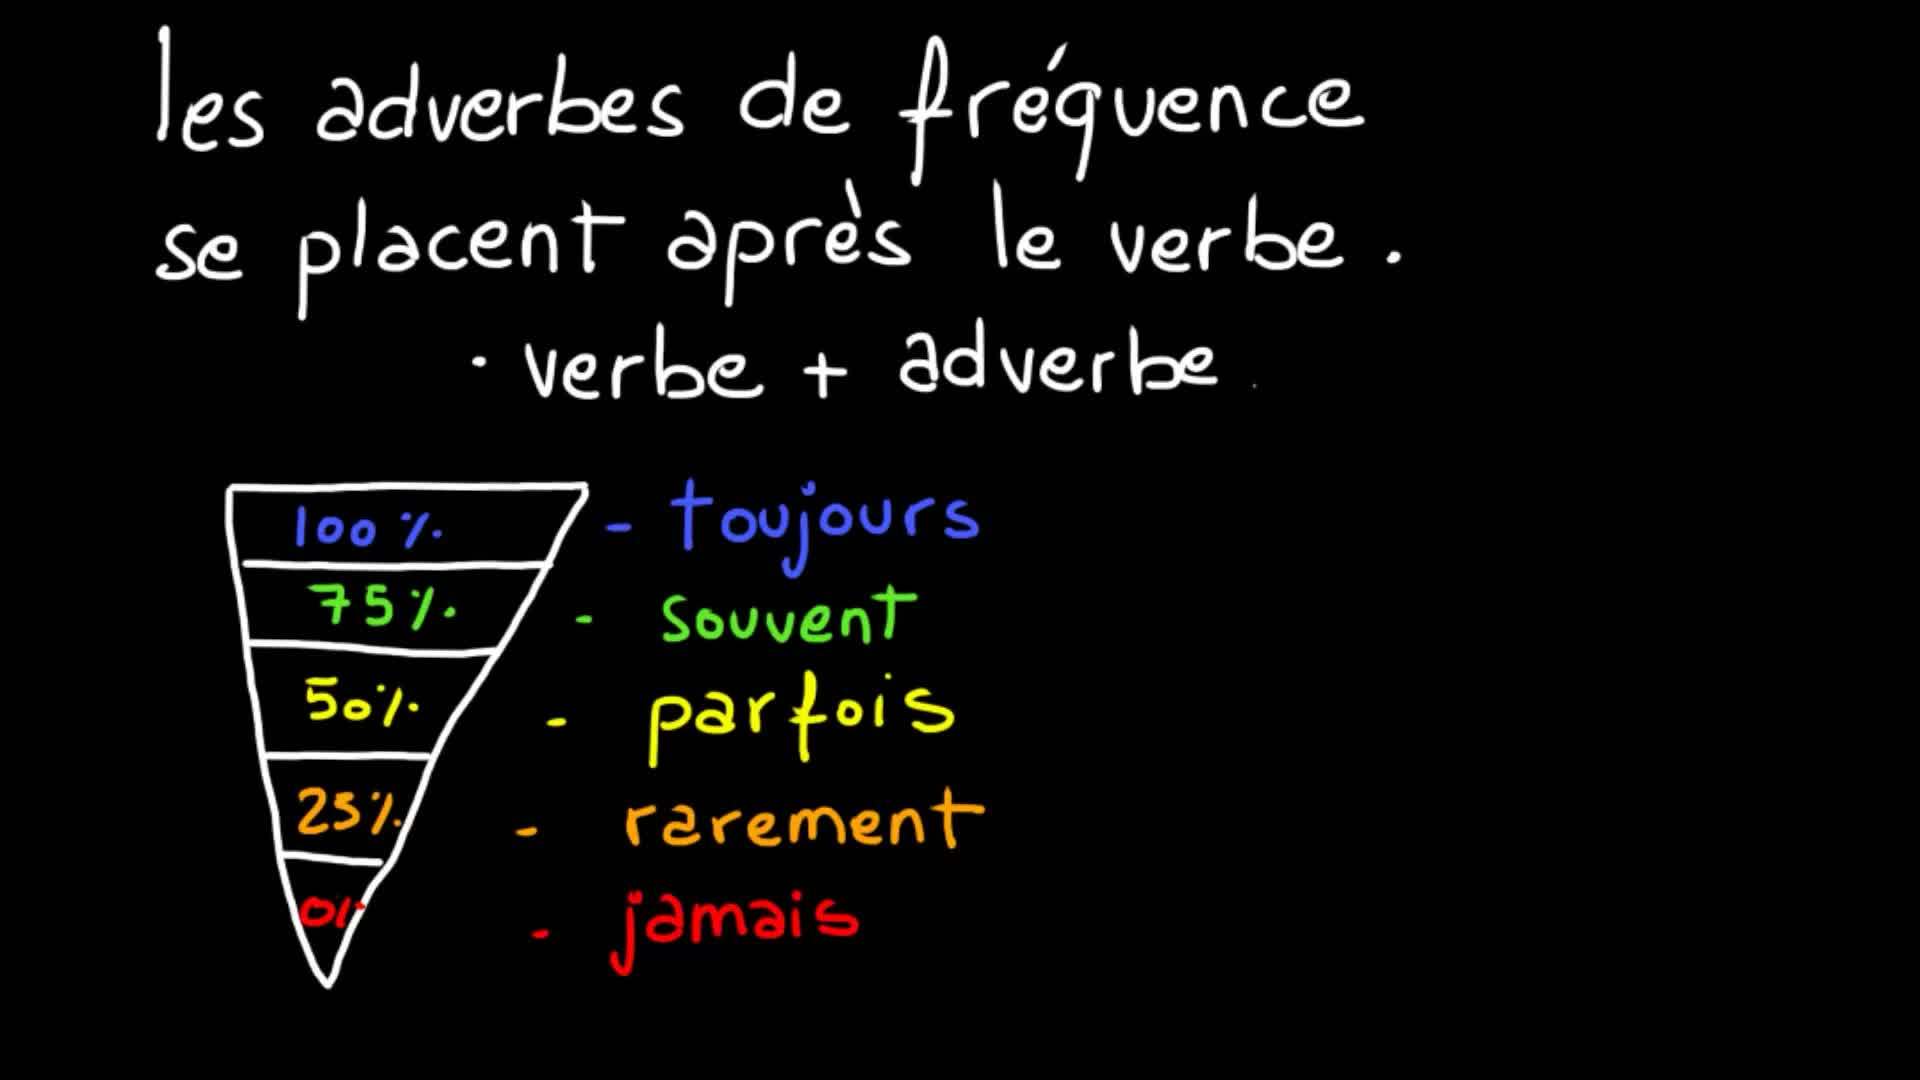 Frequency adverbs in French